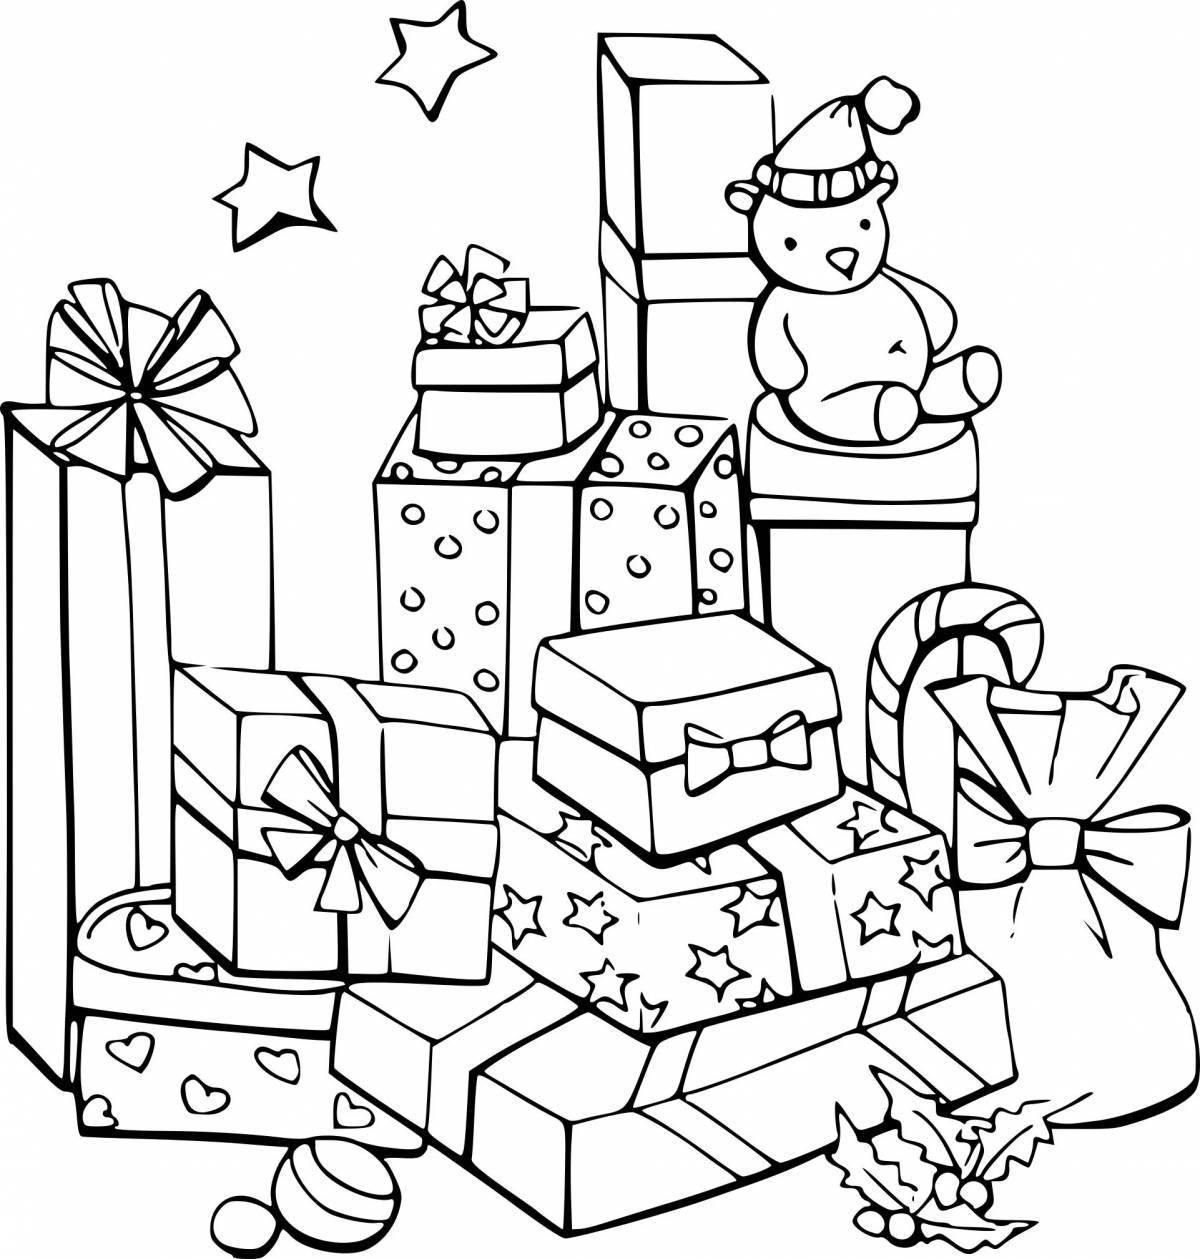 Cute gift coloring for kids